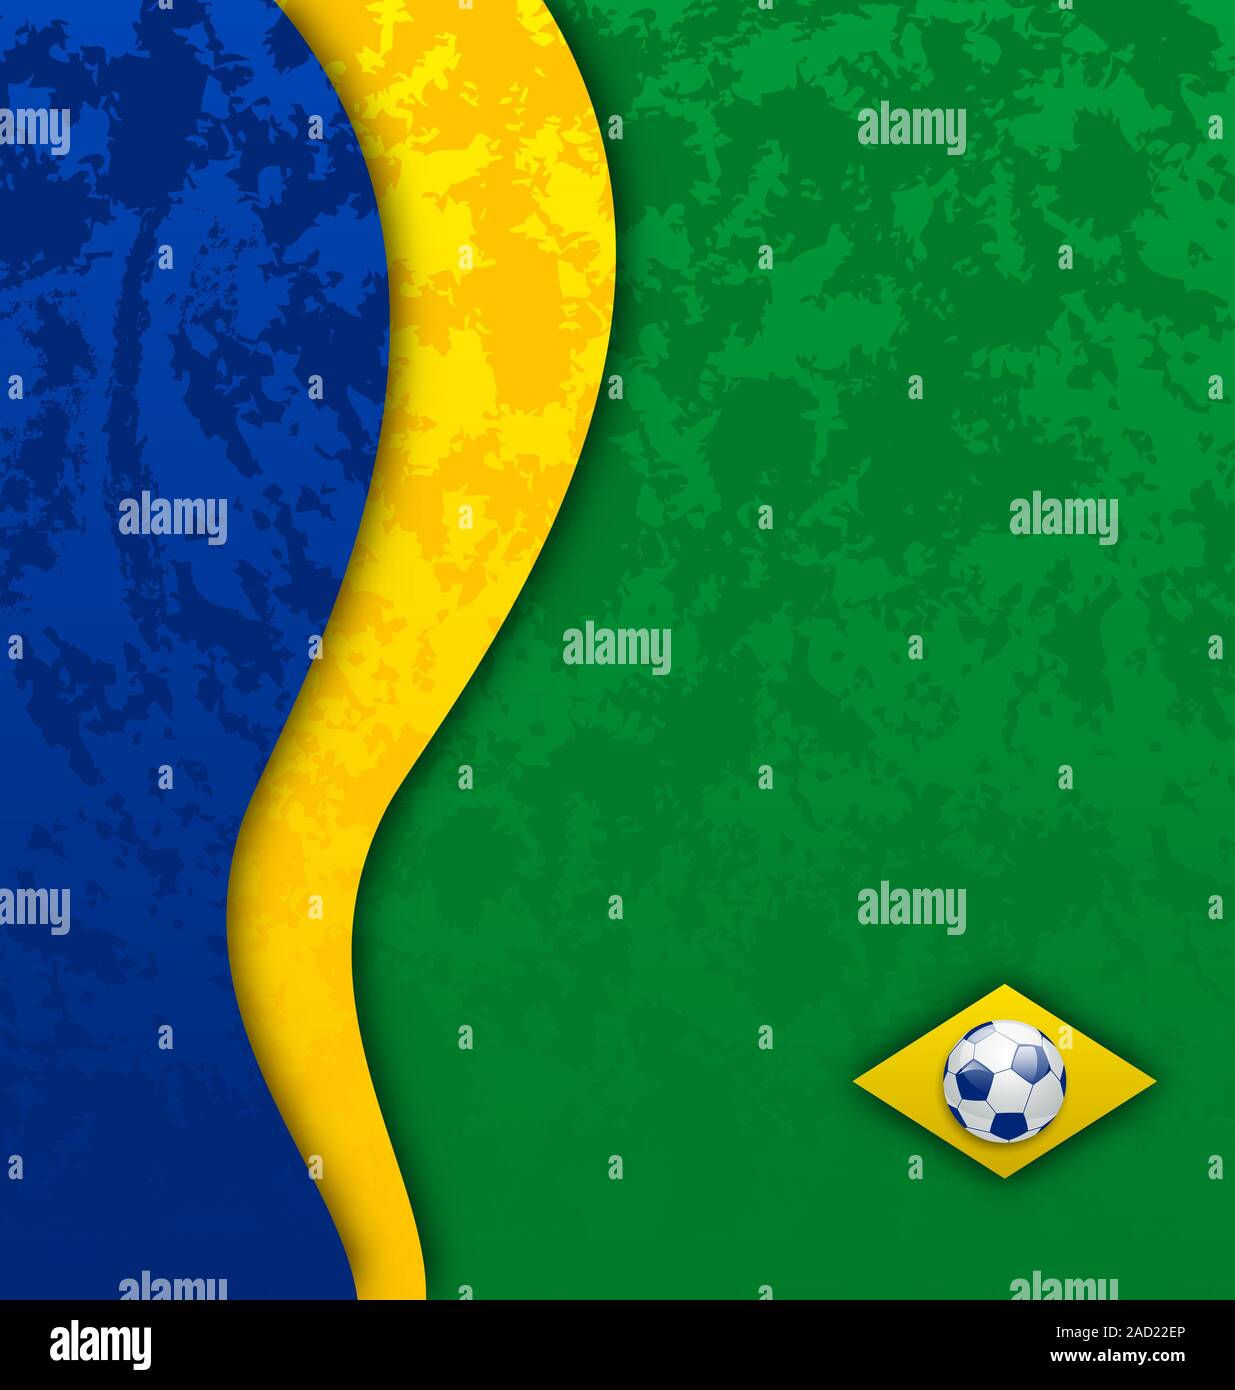 Grunge football background in Brazil flag colors Stock Photo